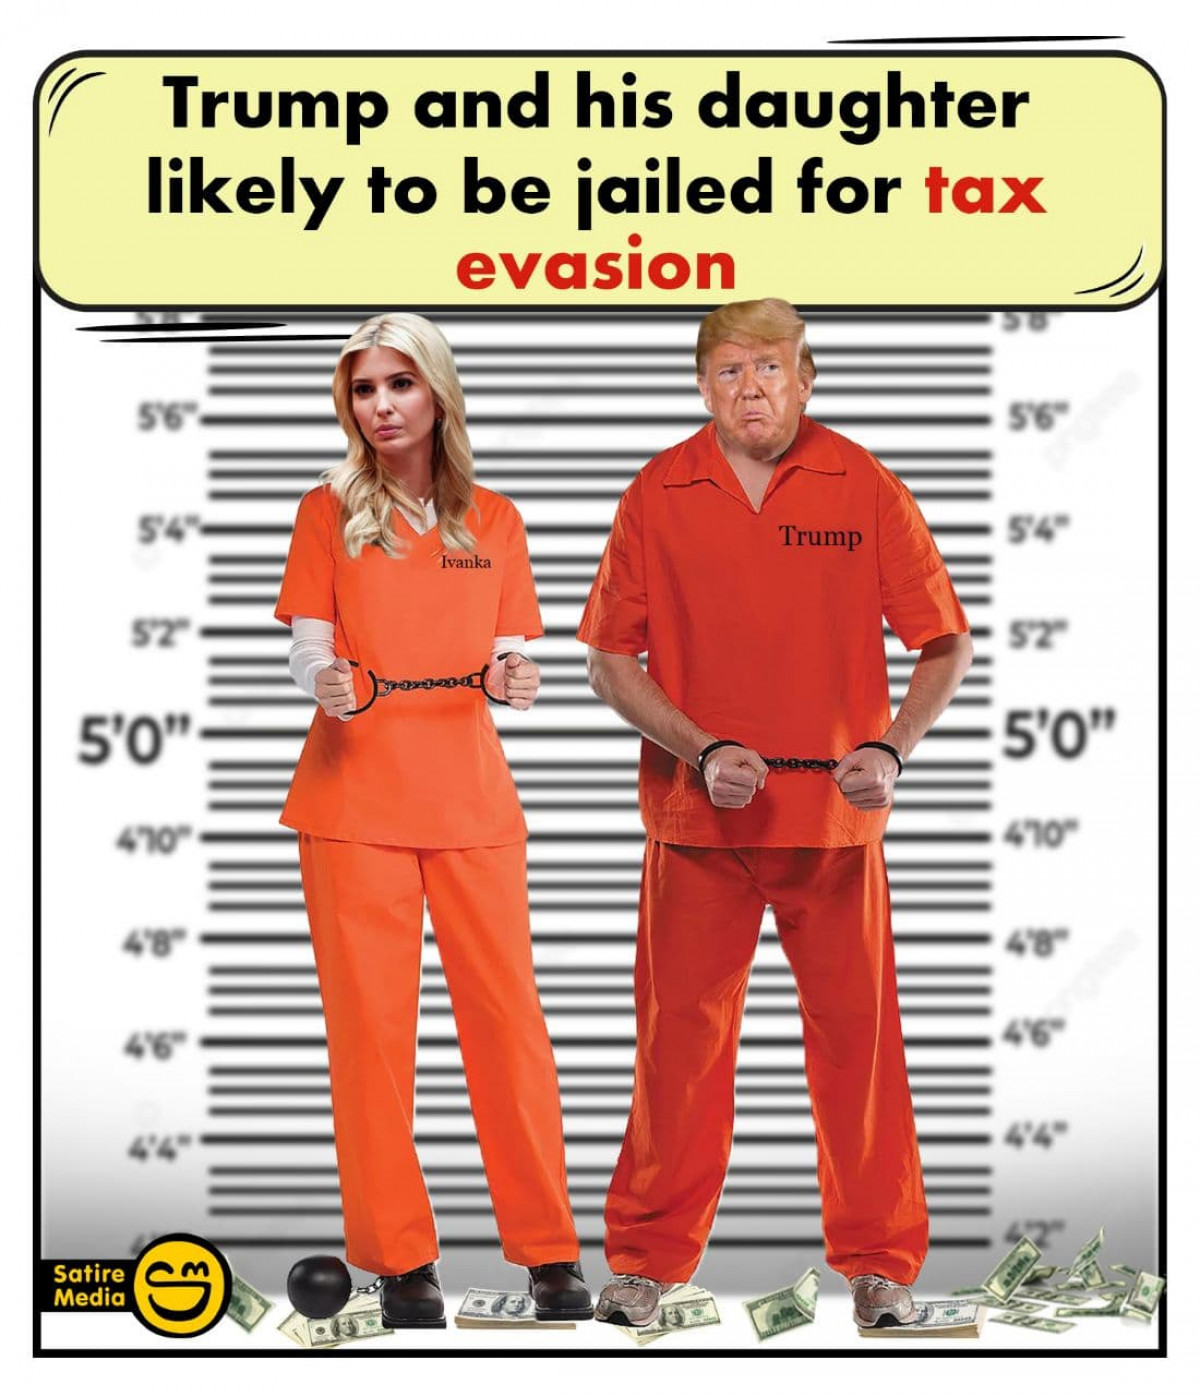 Trump and his daughter likely to be jailed for tax evasion